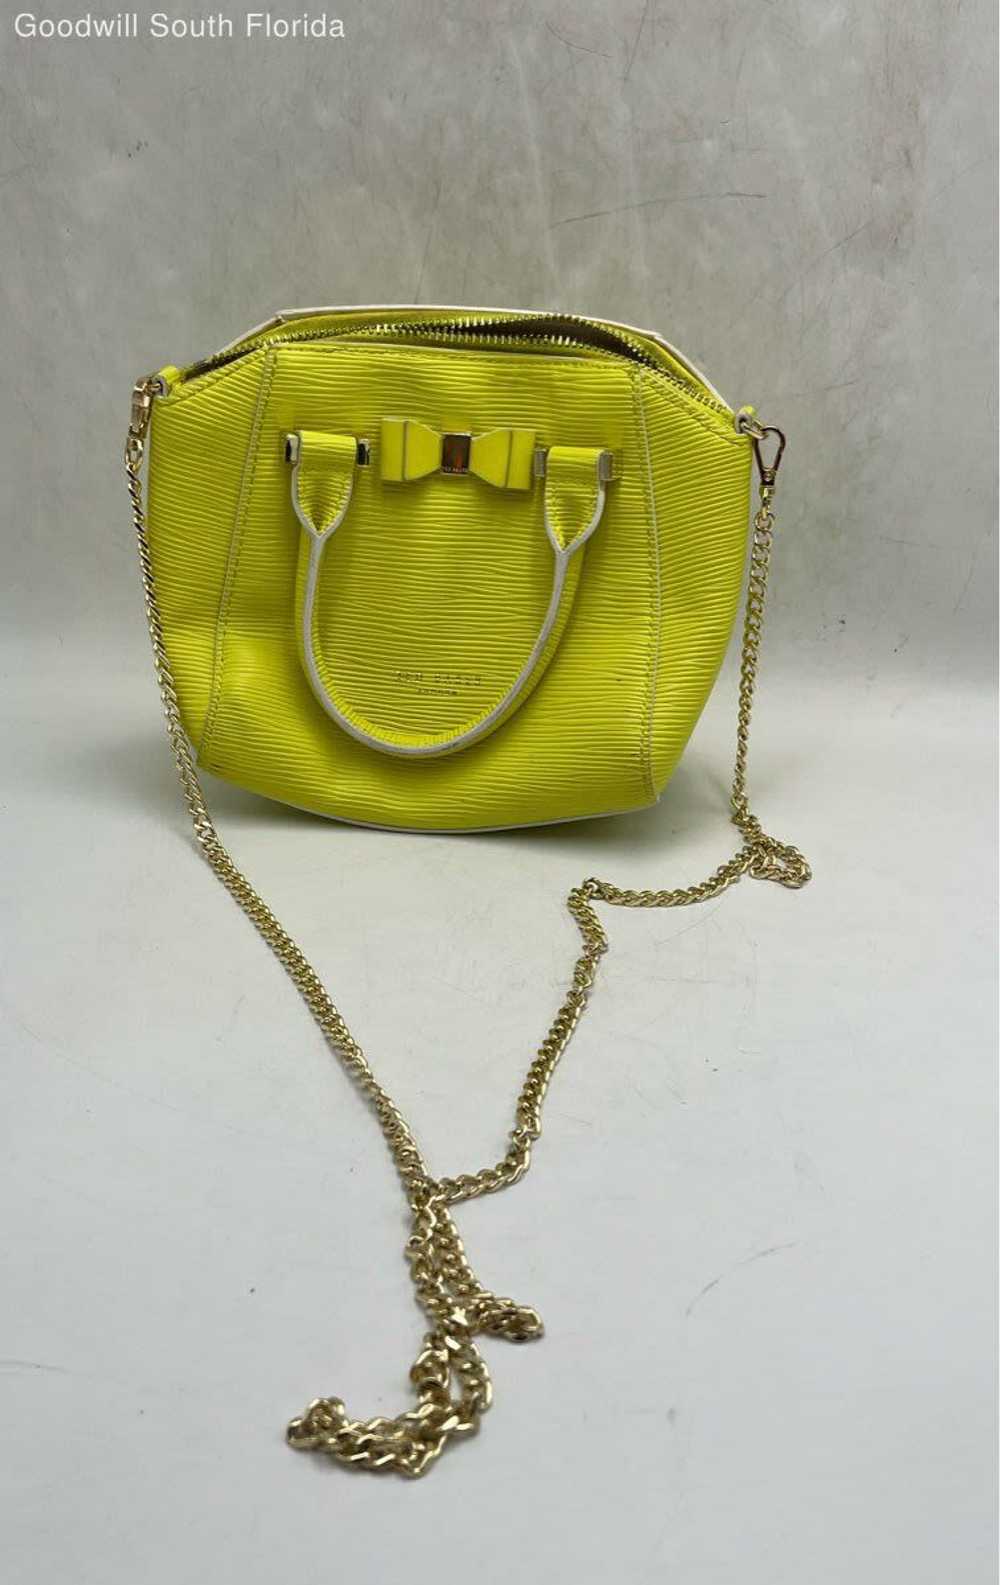 Ted Baker London Bright Yellow Purse - image 1